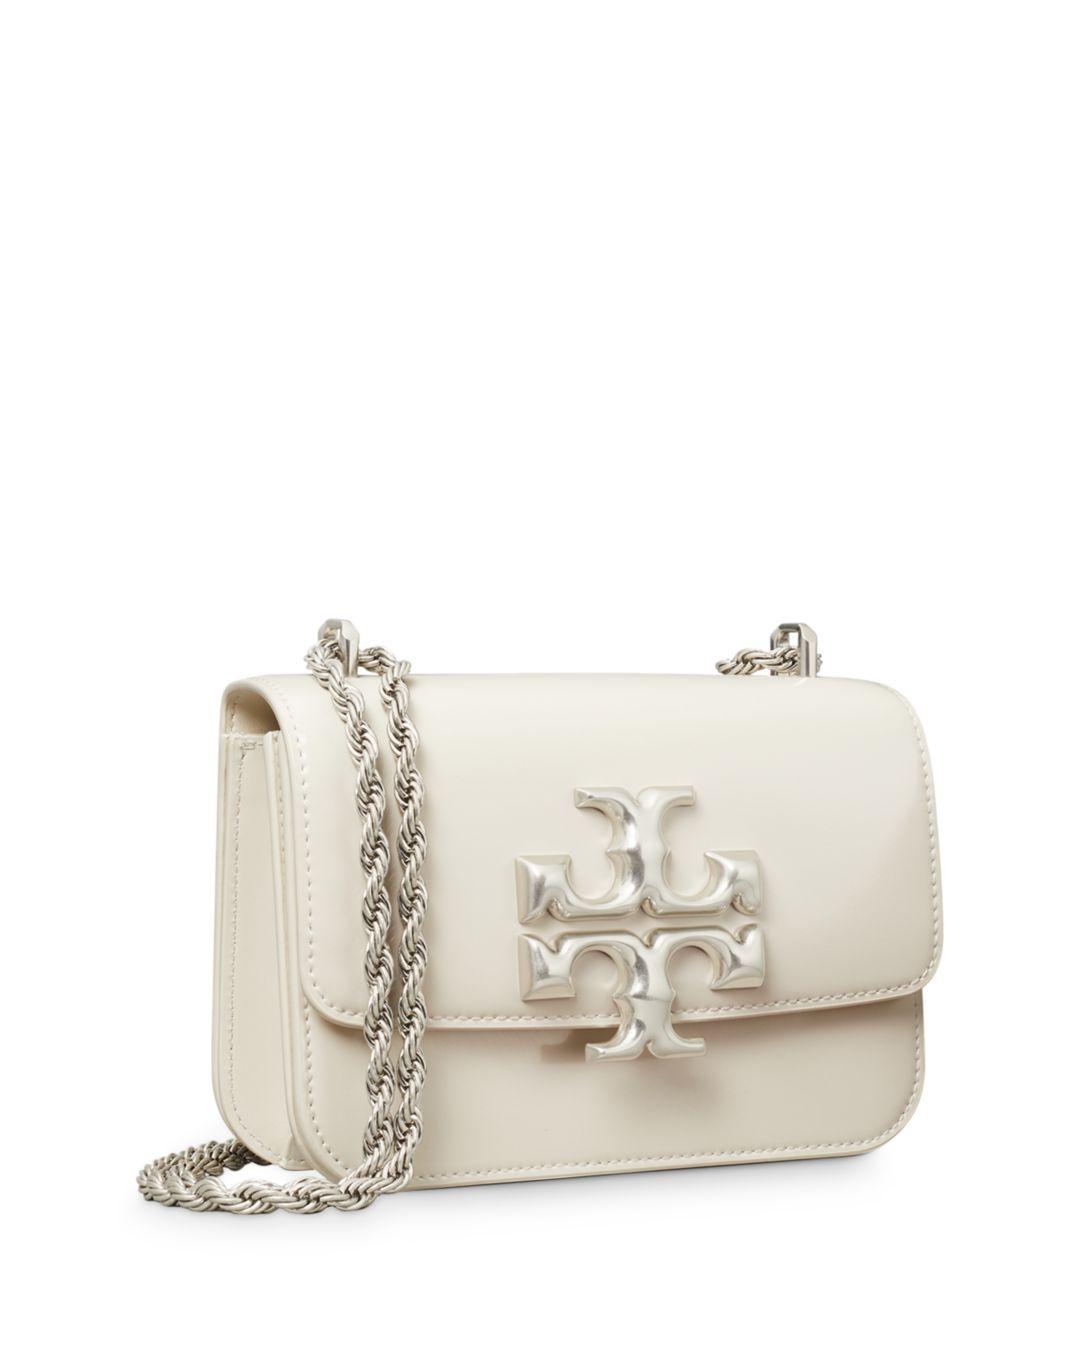 Tory Burch Leather Eleanor Small Bag in White - Lyst